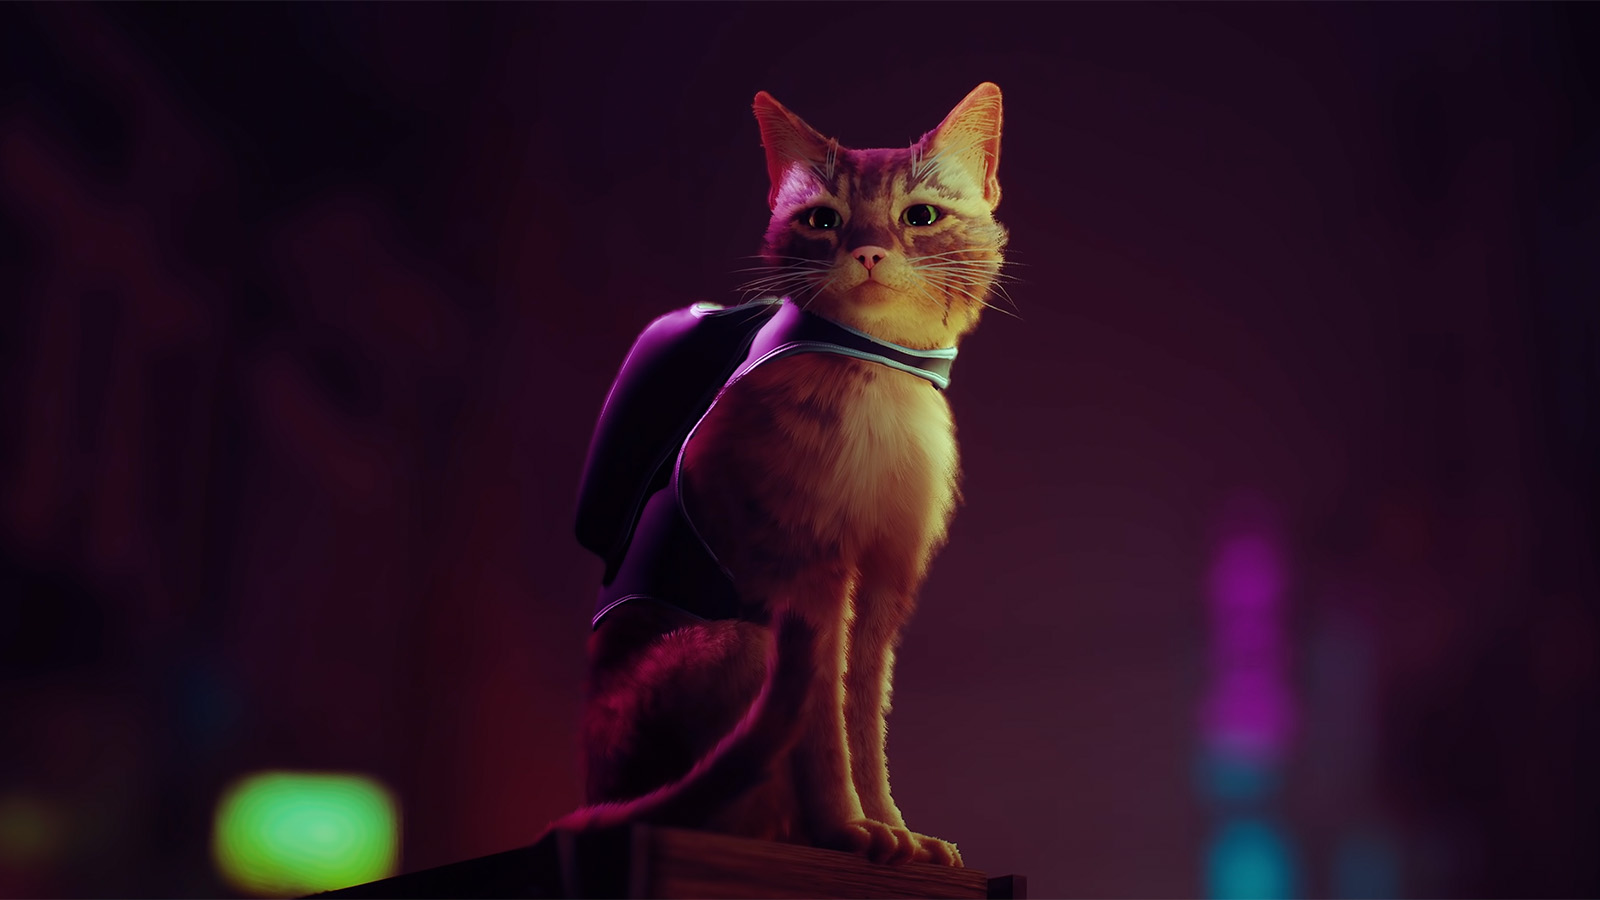 Cat Adventure Game Stray Gets Delayed To Summer 2022